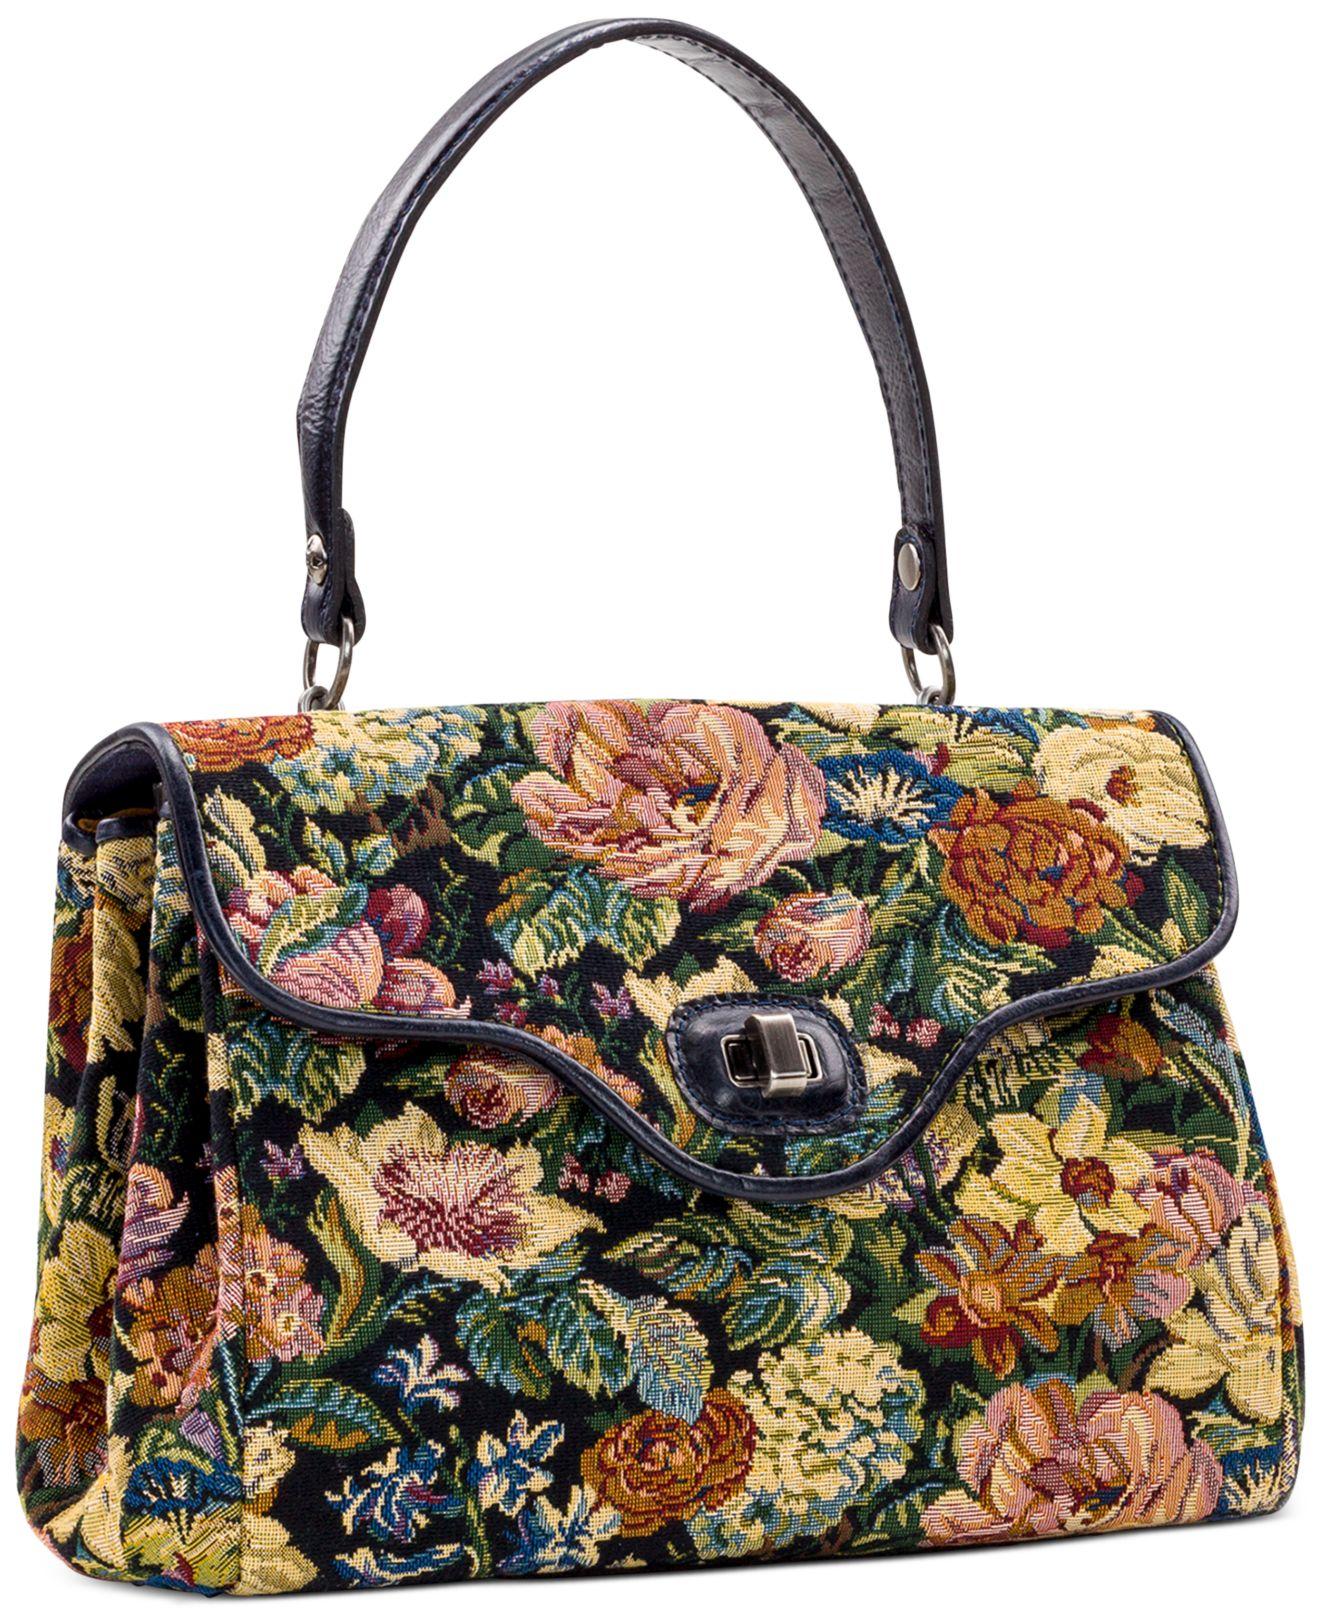 Patricia Nash Woven Floral Tapestry Verga Satchel - Lyst